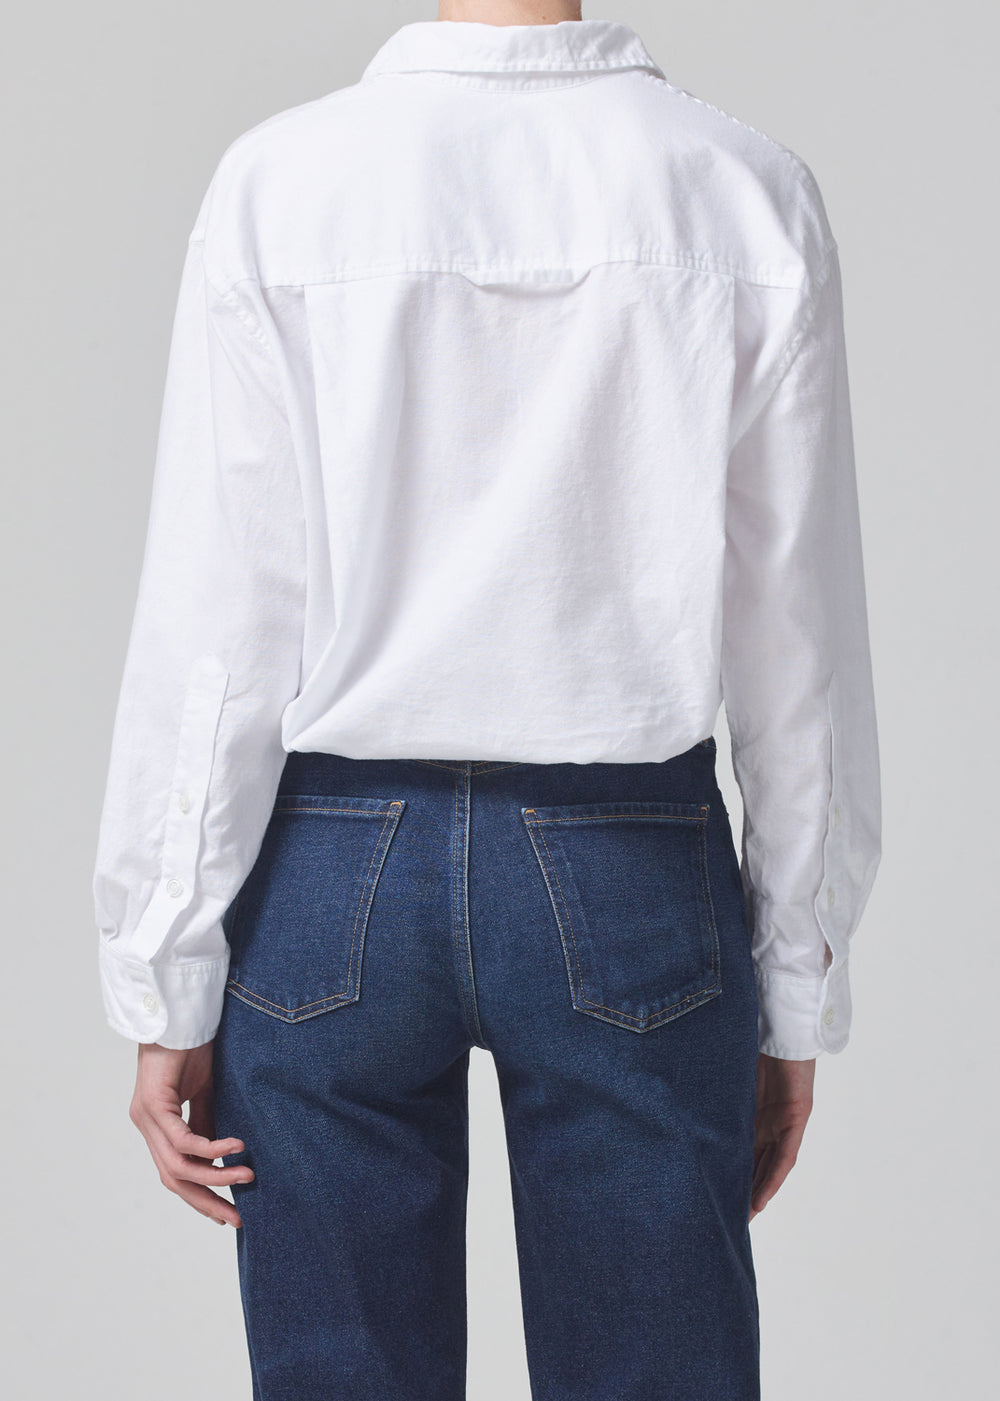 Citizens of Humanity Kayla Oxford Shirt in White